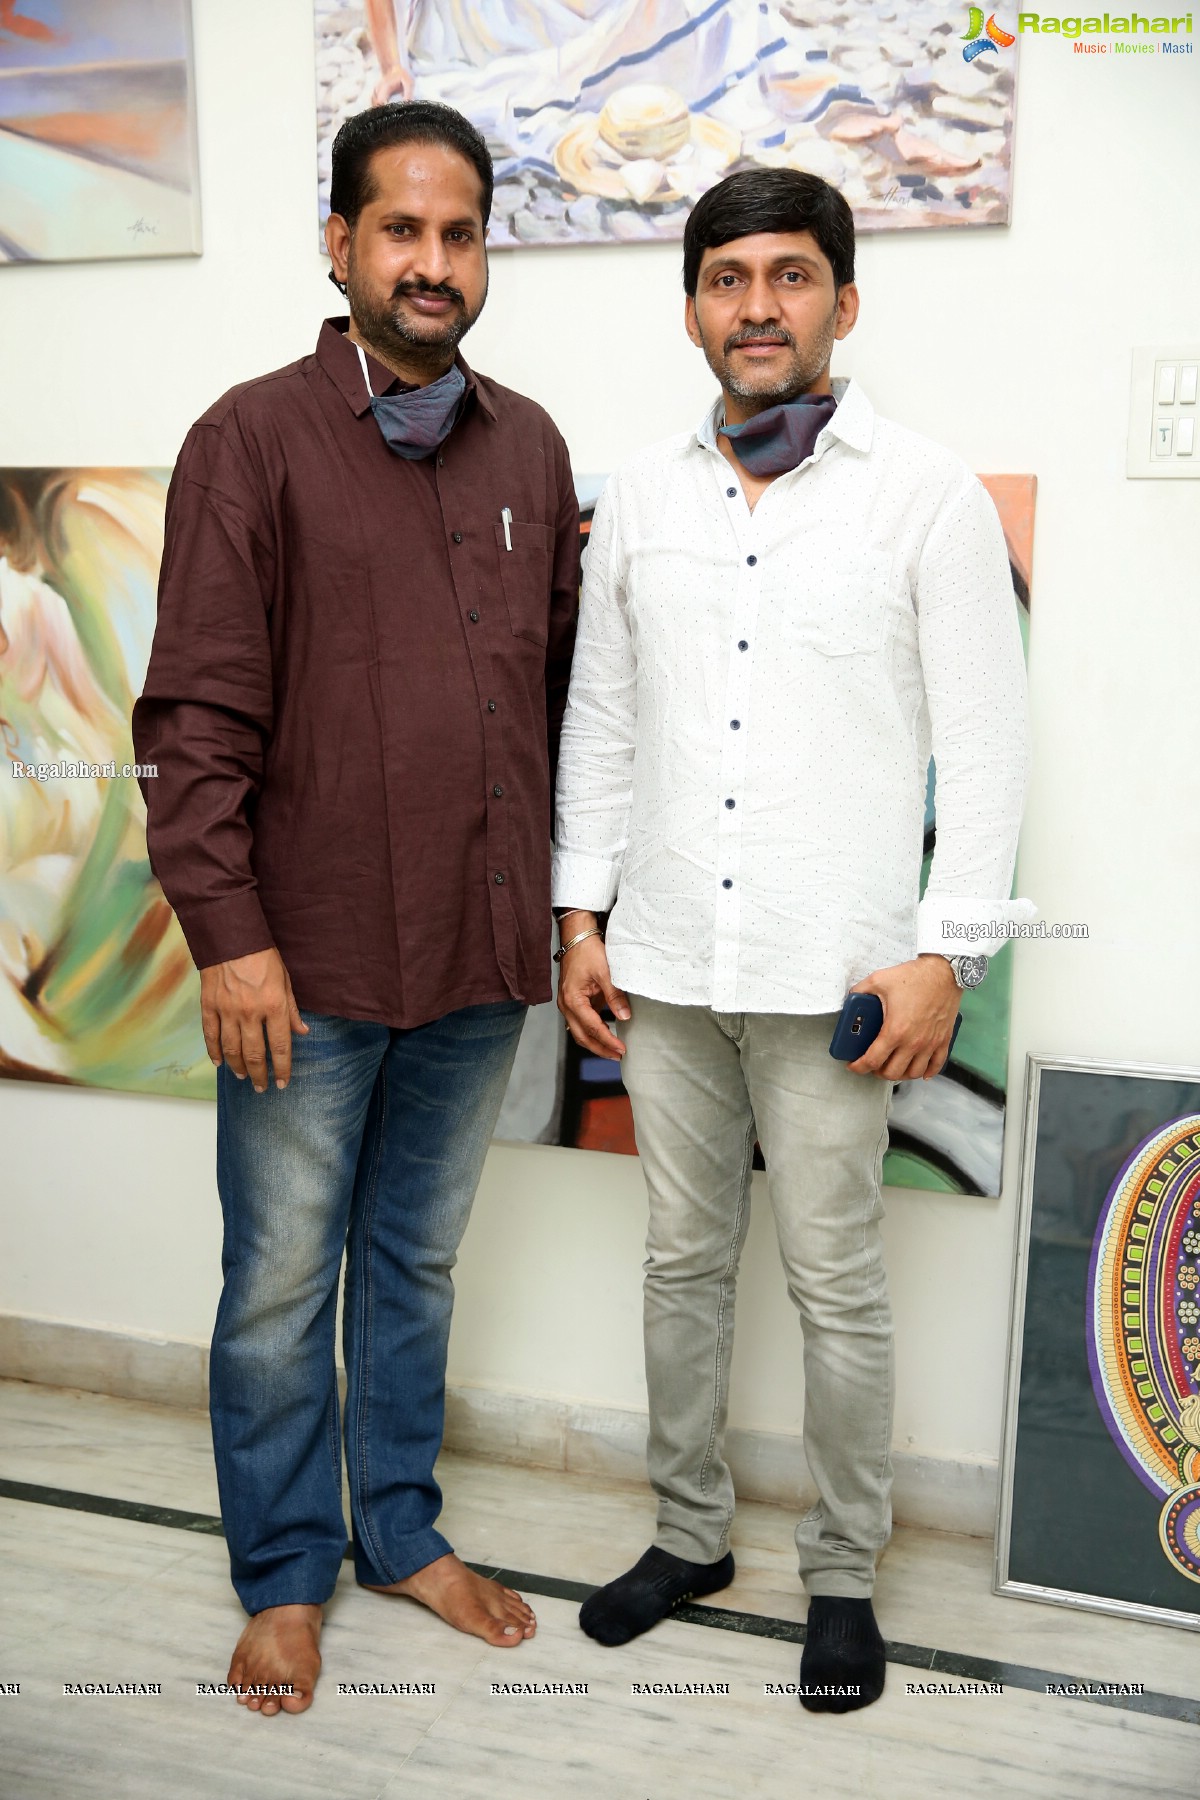 Obsession, Art for a Cause - Paintings Exhibition at VSL Visual International Art Gallery